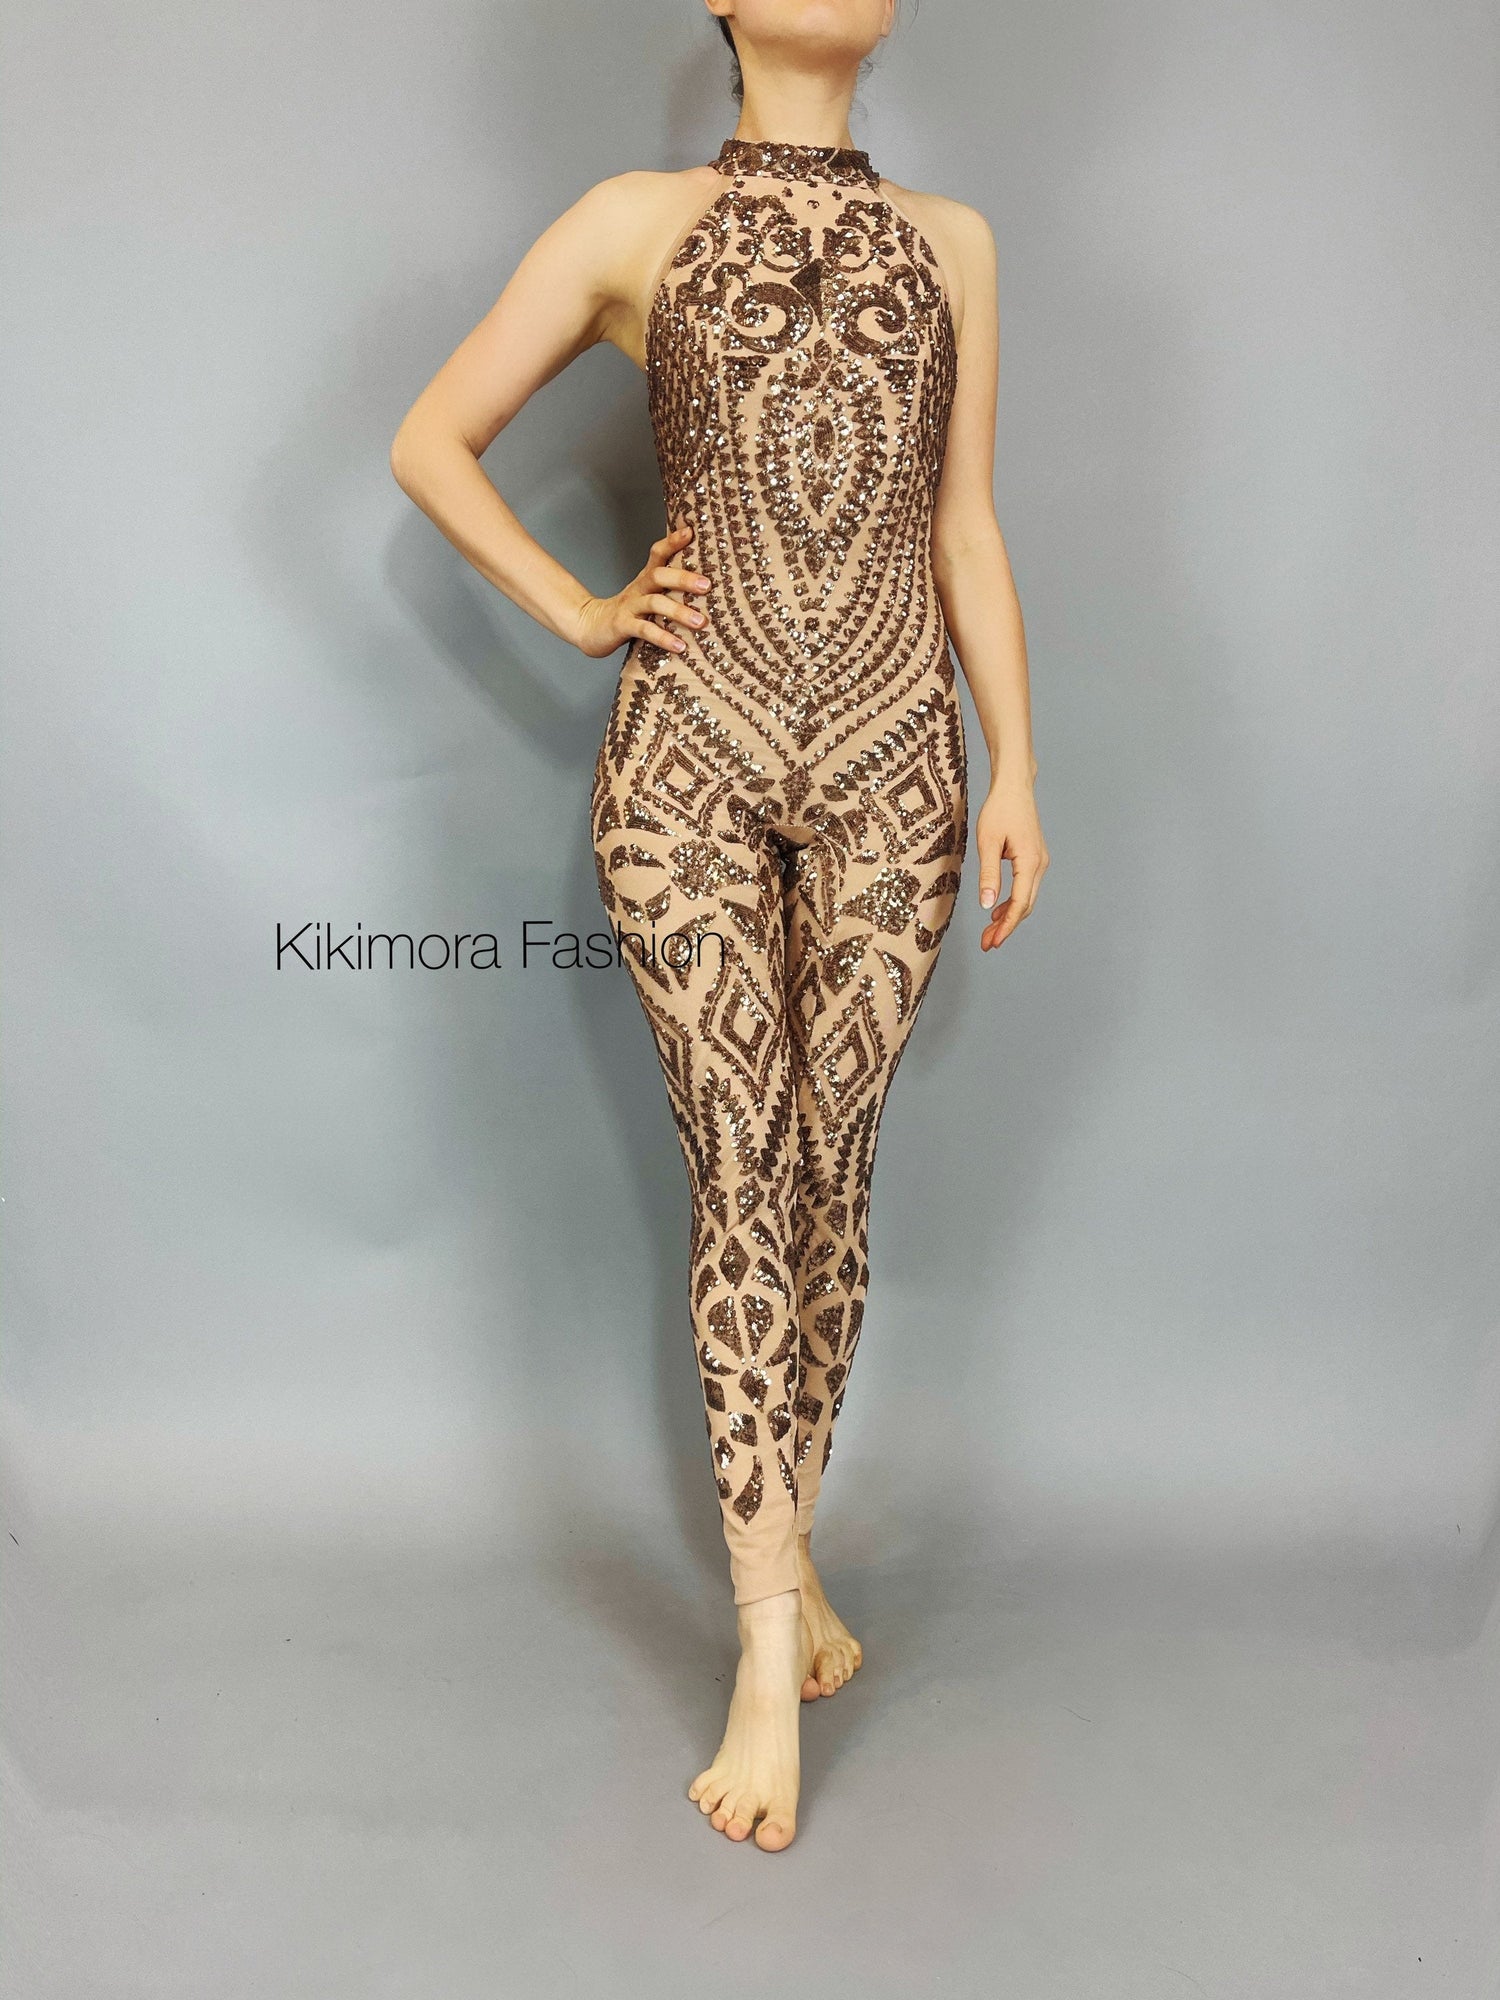 Sequins Jumpsuit, Glamorous Catsuit, Stage Costume, Gymnastic Unitard, Party Outfit, Wedding Bodysuit